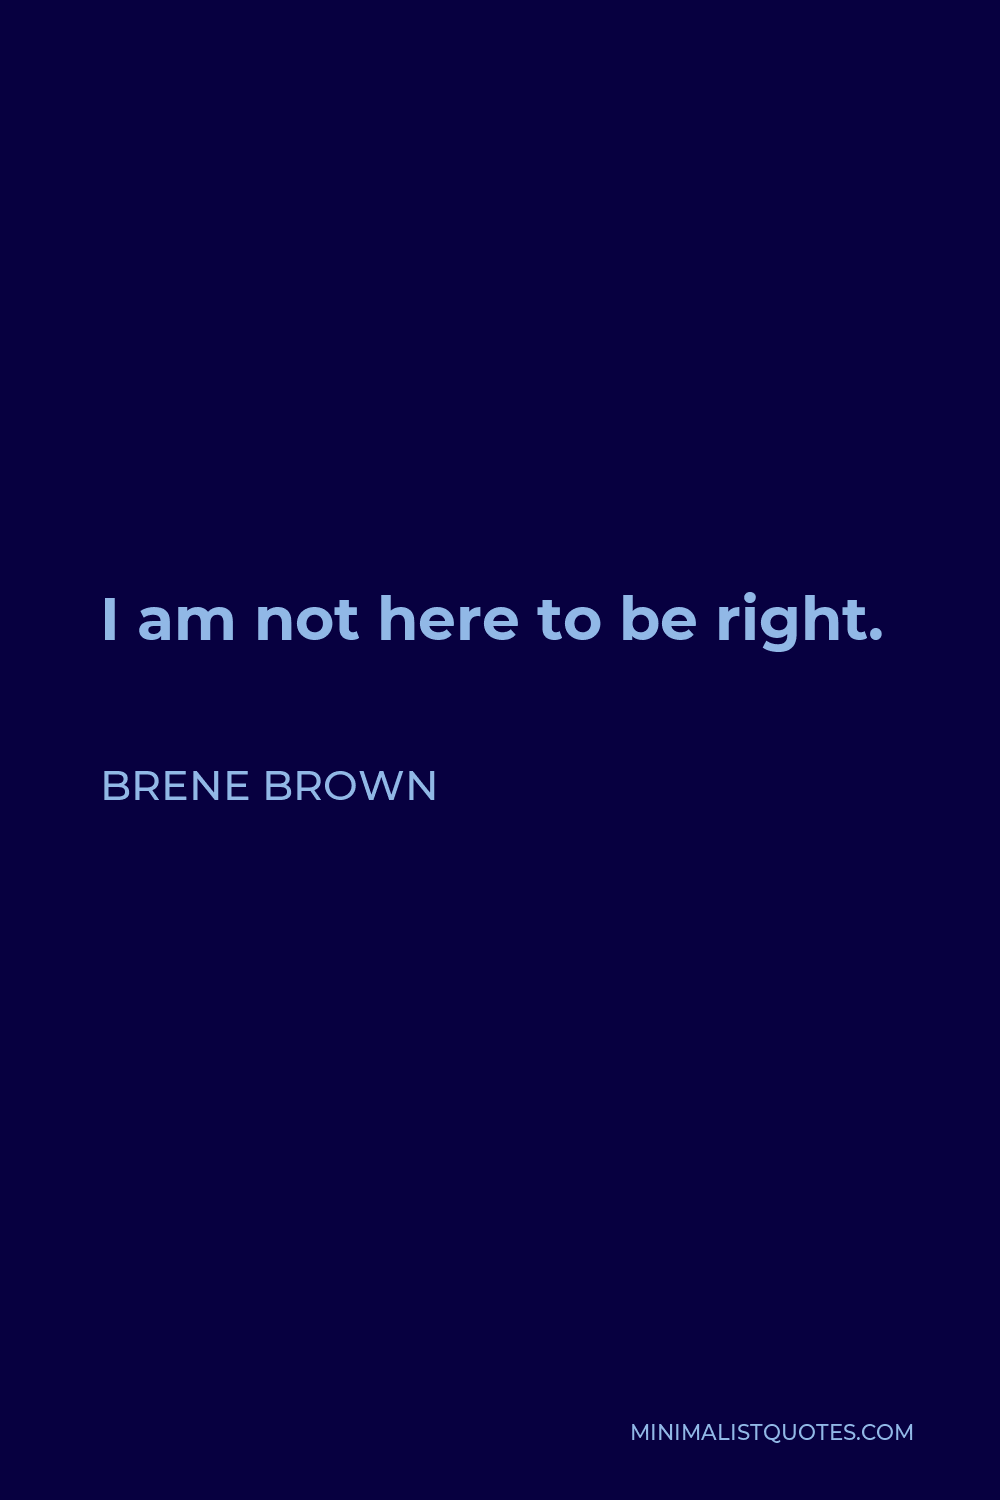 Brene Brown Quote - I am not here to be right.